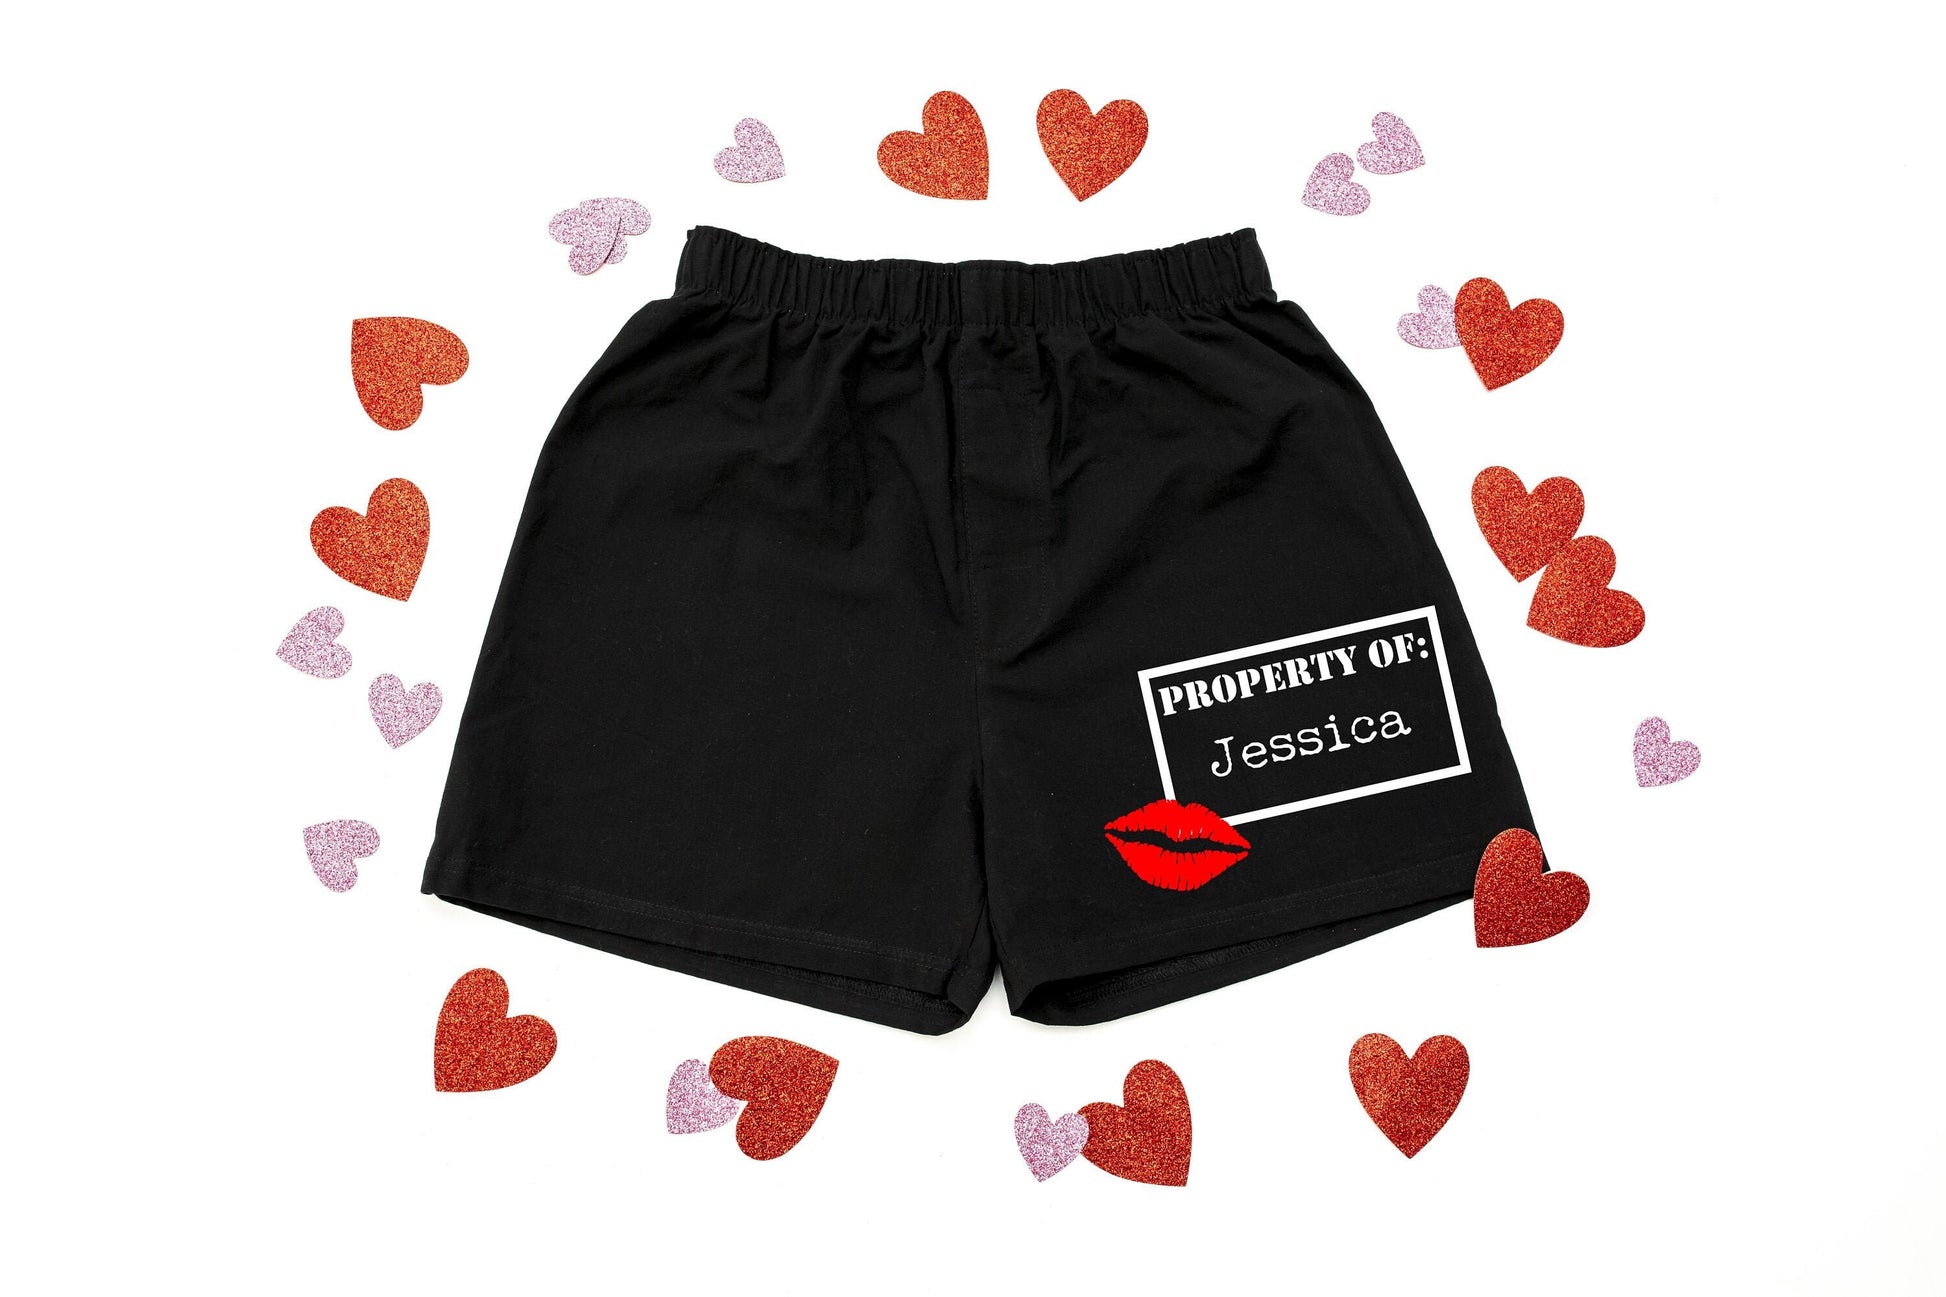 IMPROVED Personalized Property Of Men's Super Soft Cotton Boxer Shorts - Gift for Him - Mens Boxers - Funny Boxers - Naughty Boxers